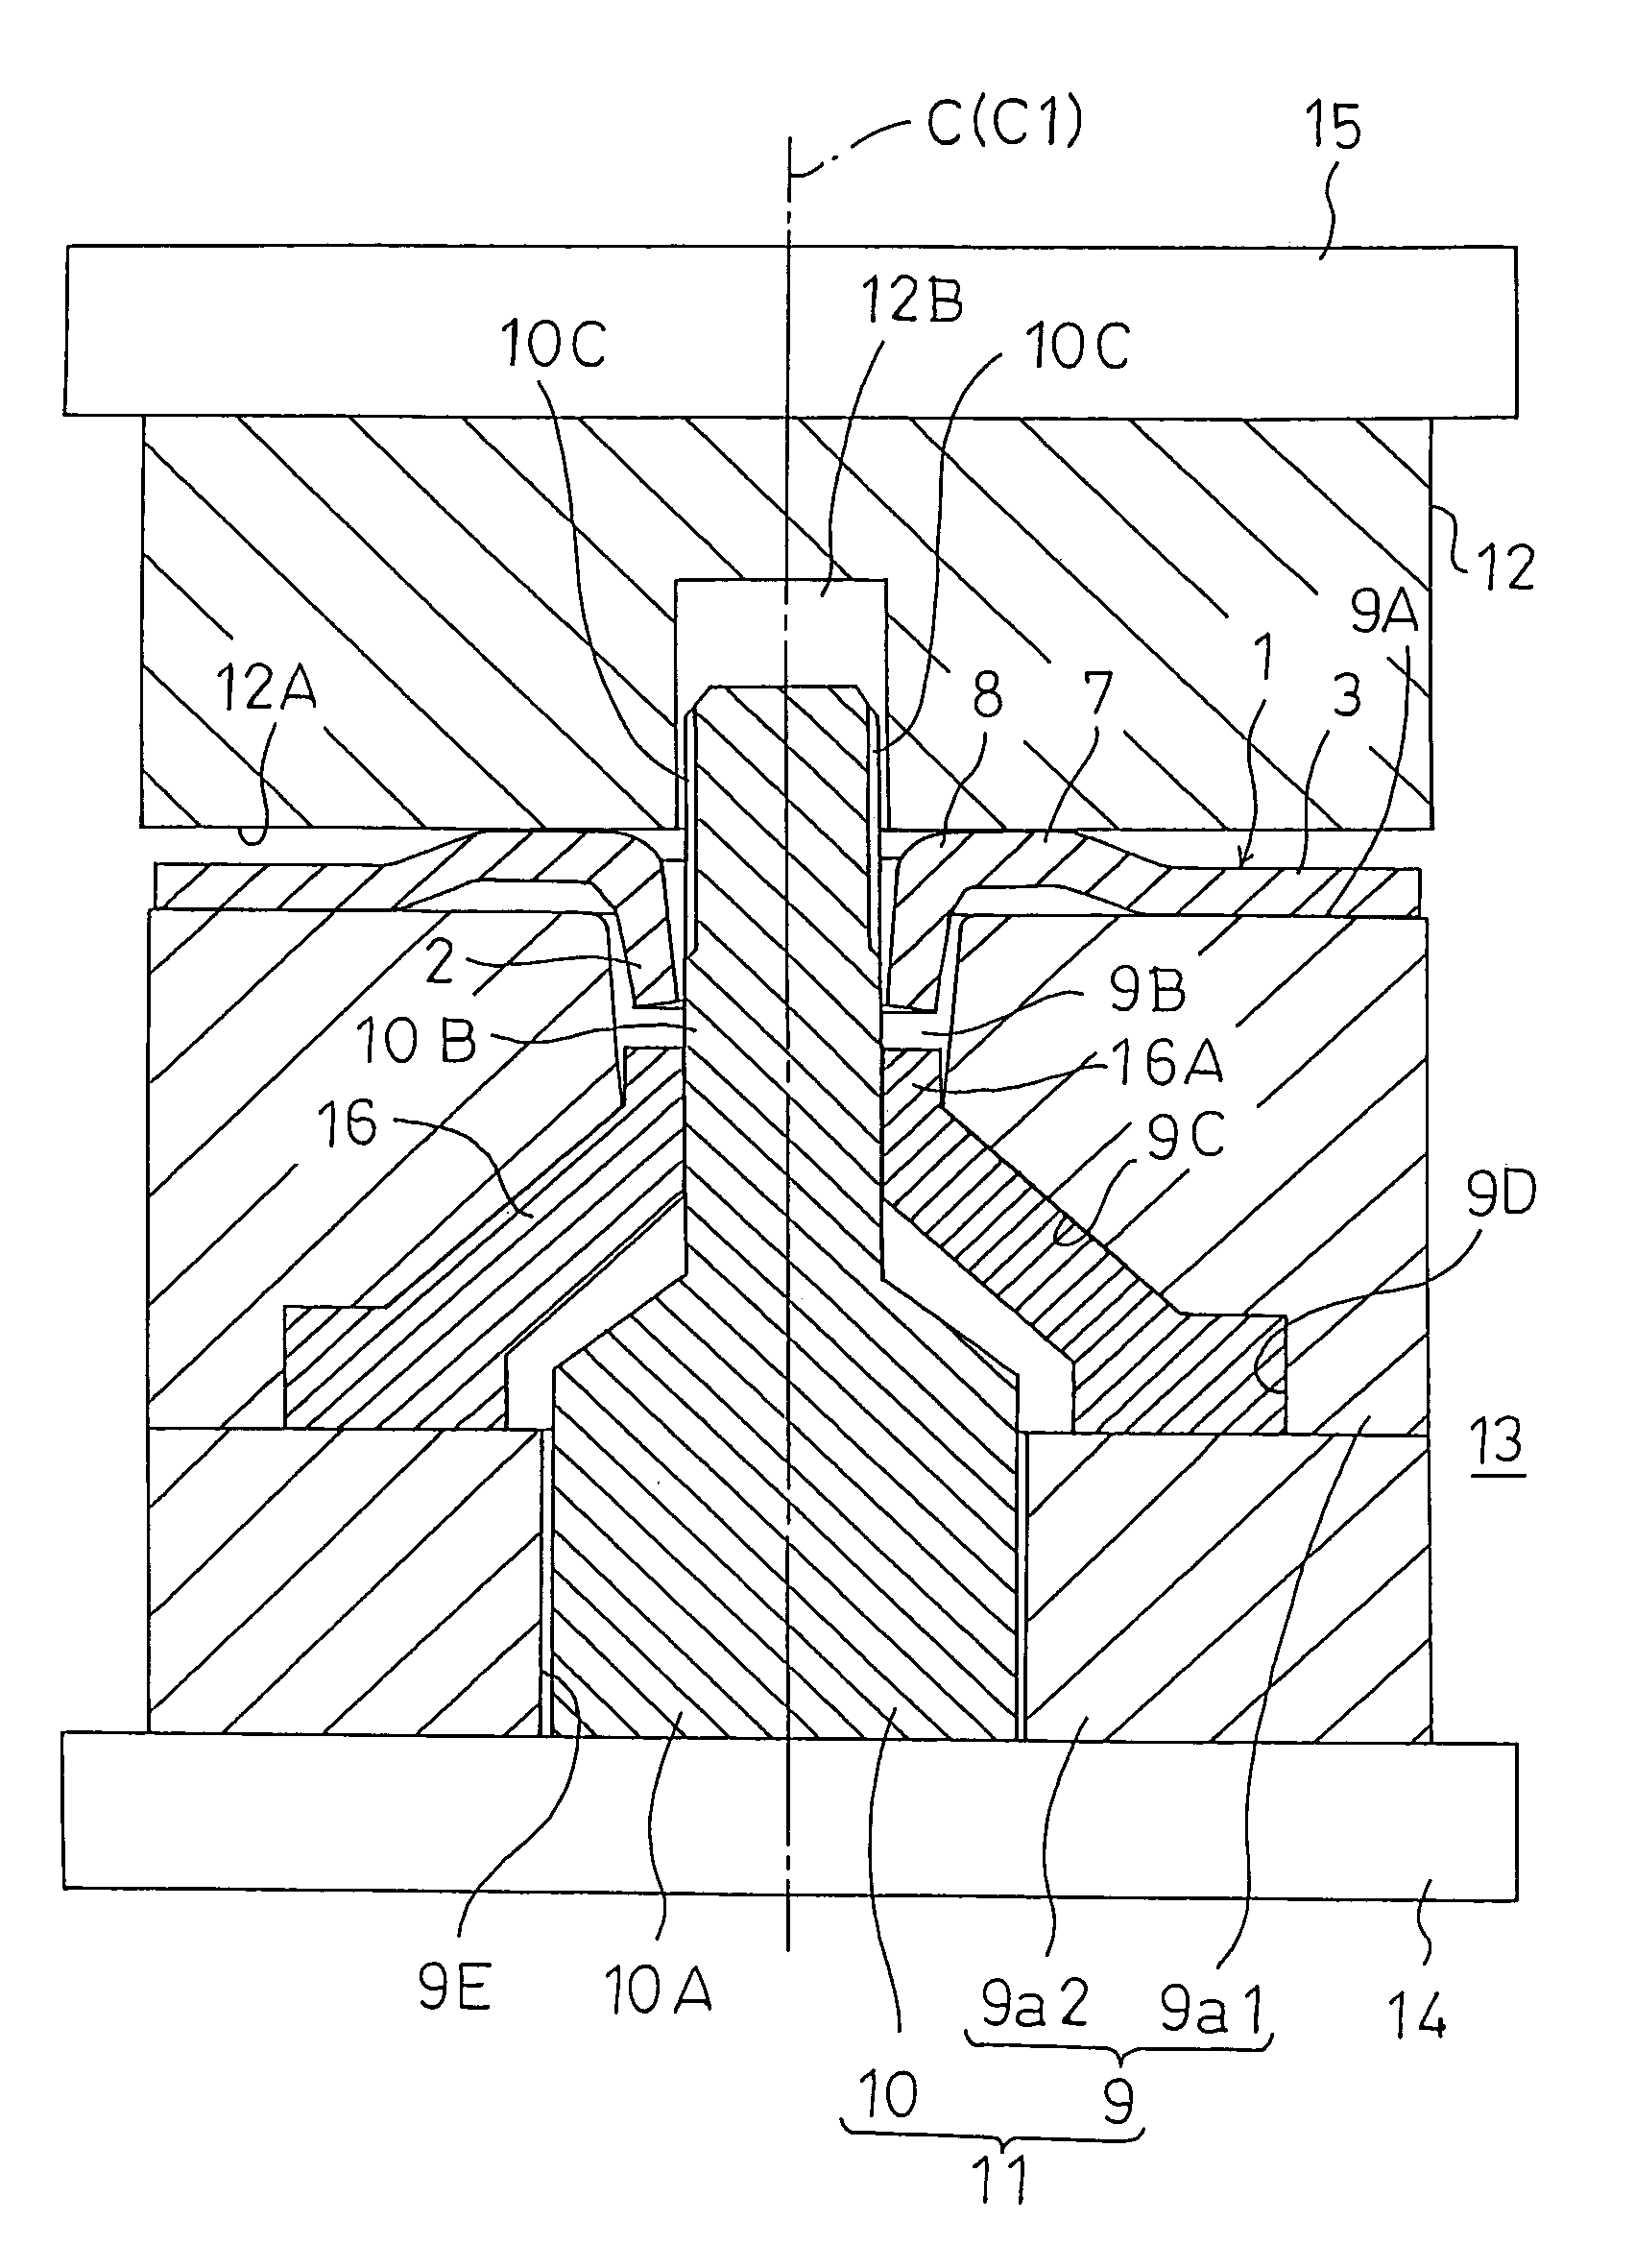 Method of forming spline and keyway for sheet metal rotating member with boss part